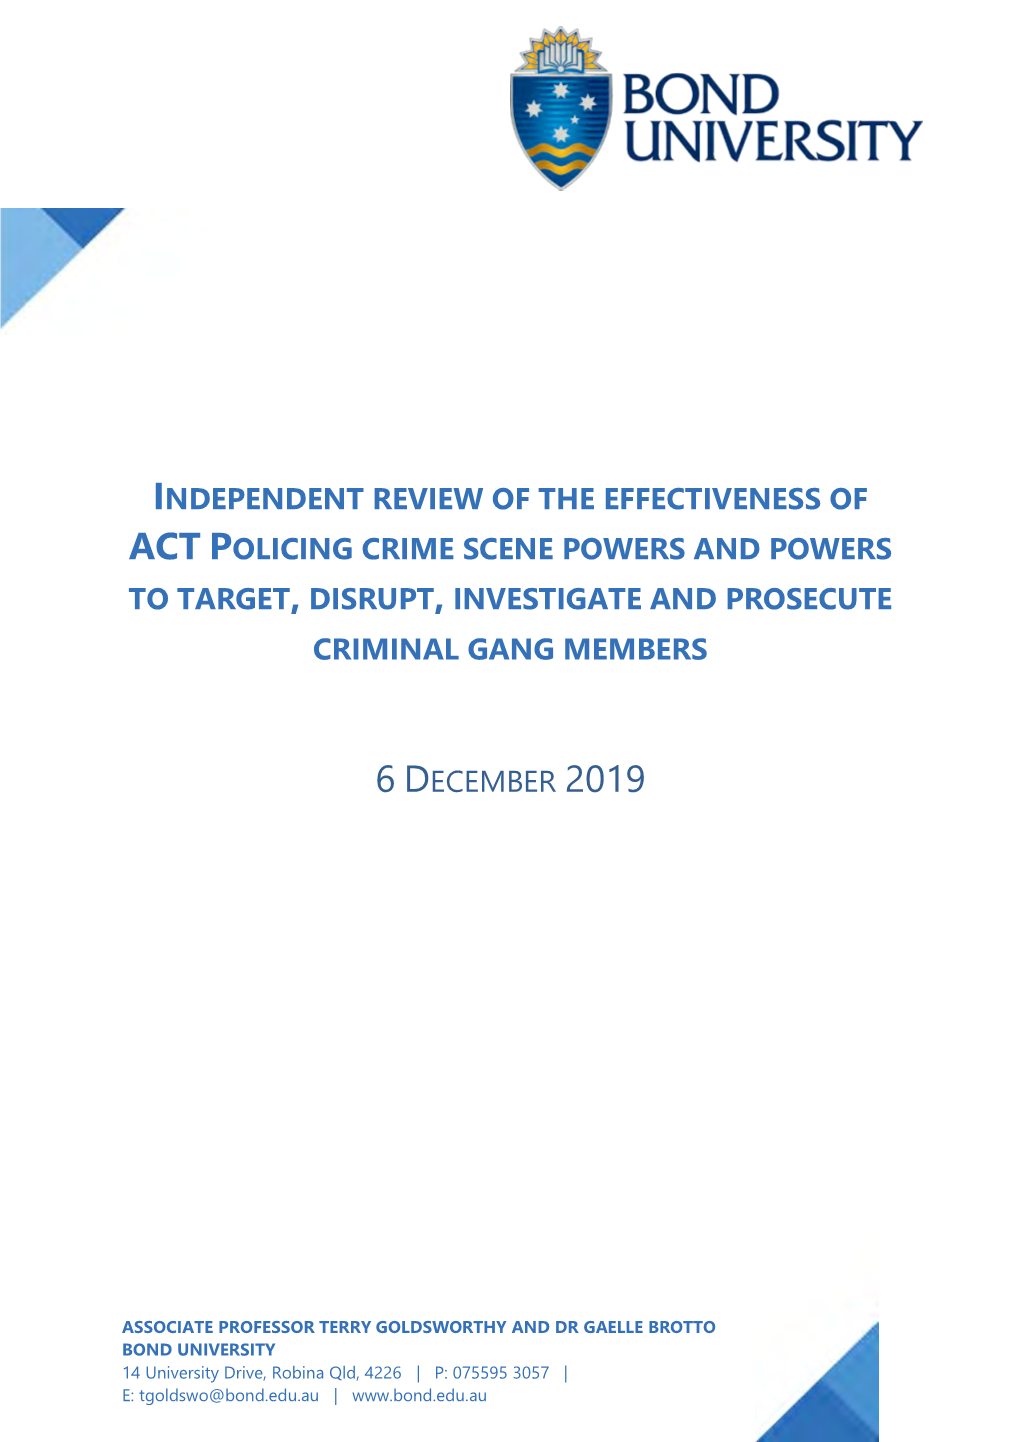 Independent Review of the Effectiveness of ACT Police Powers